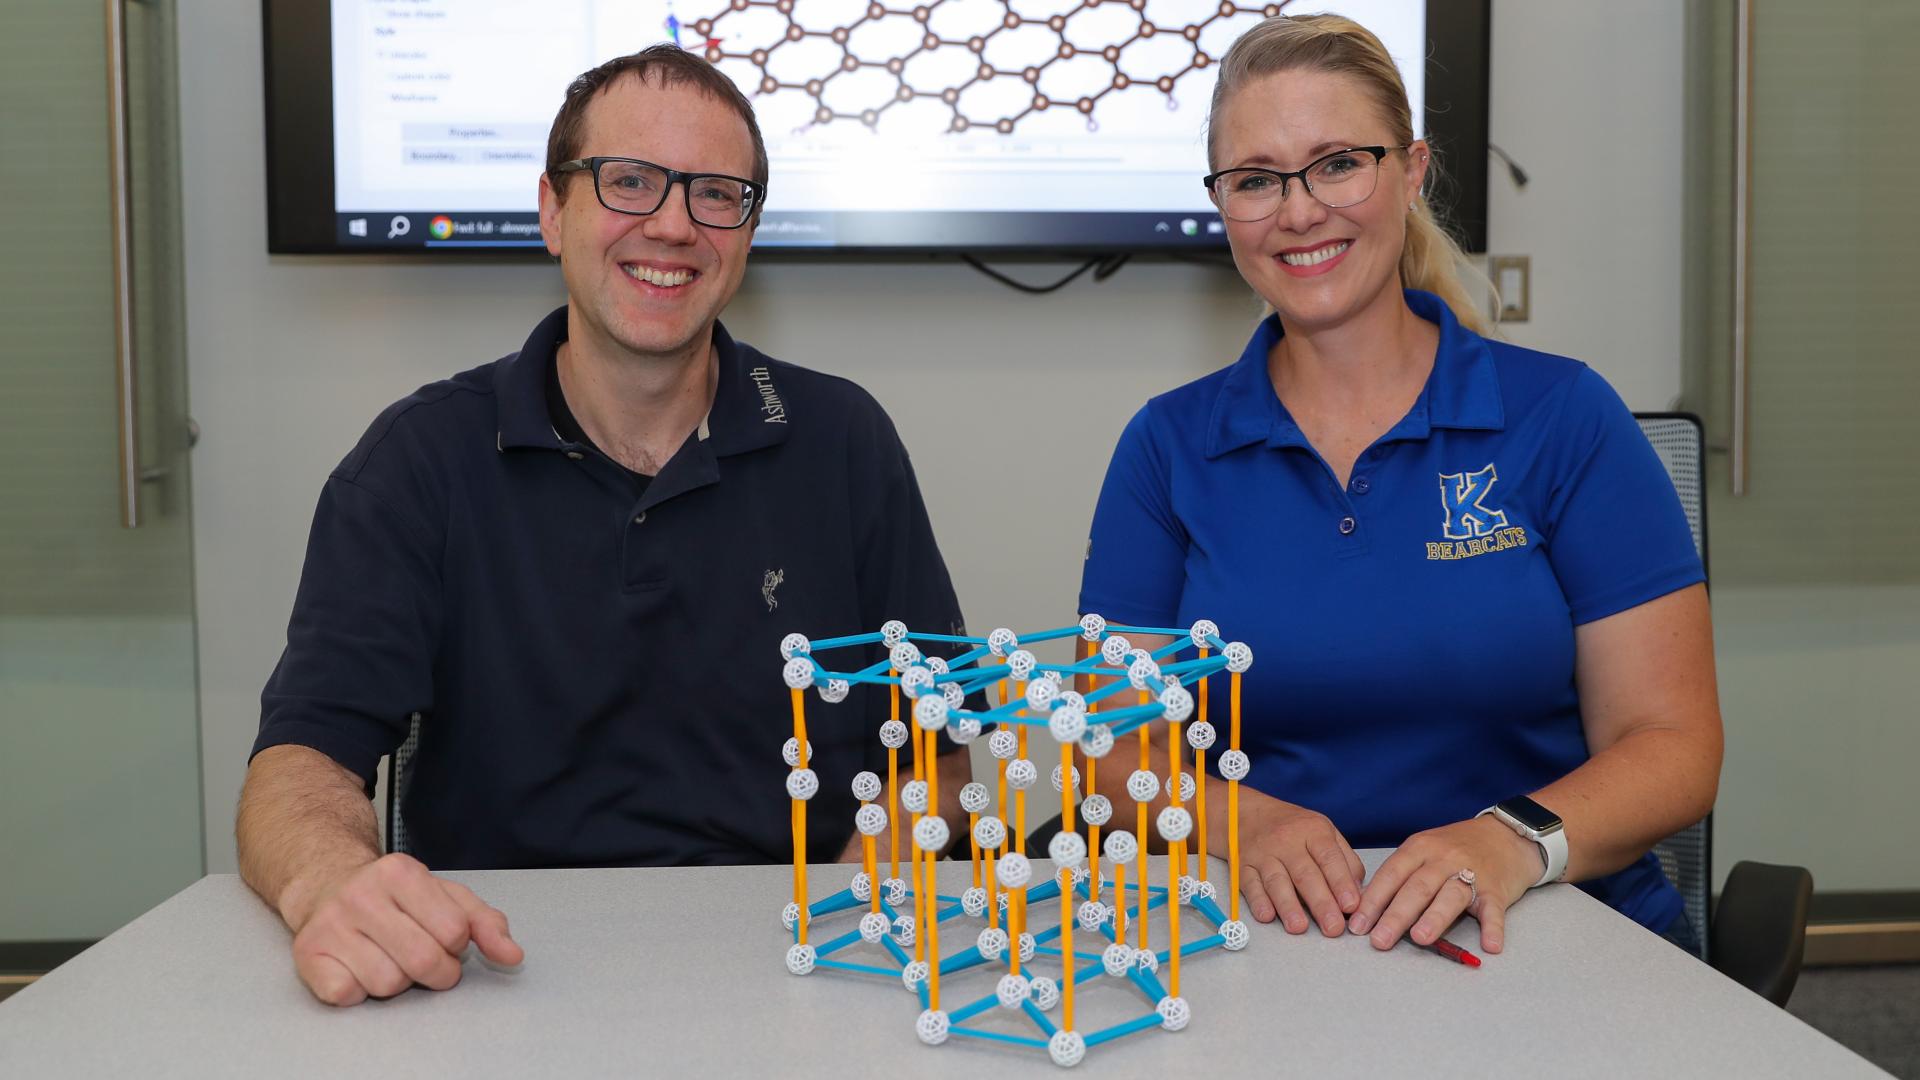 UNK Assistant Professor of Physics Alex Wysocki (left) and Kearney High School chemistry teacher Alison Klein collaborate on quantum materials in the summer of 2023 via an “RET” (Research Experience for Teachers) funded by the National Science Foundation via Nebraska EPSCoR. Photo by University of Nebraska at Kearney.